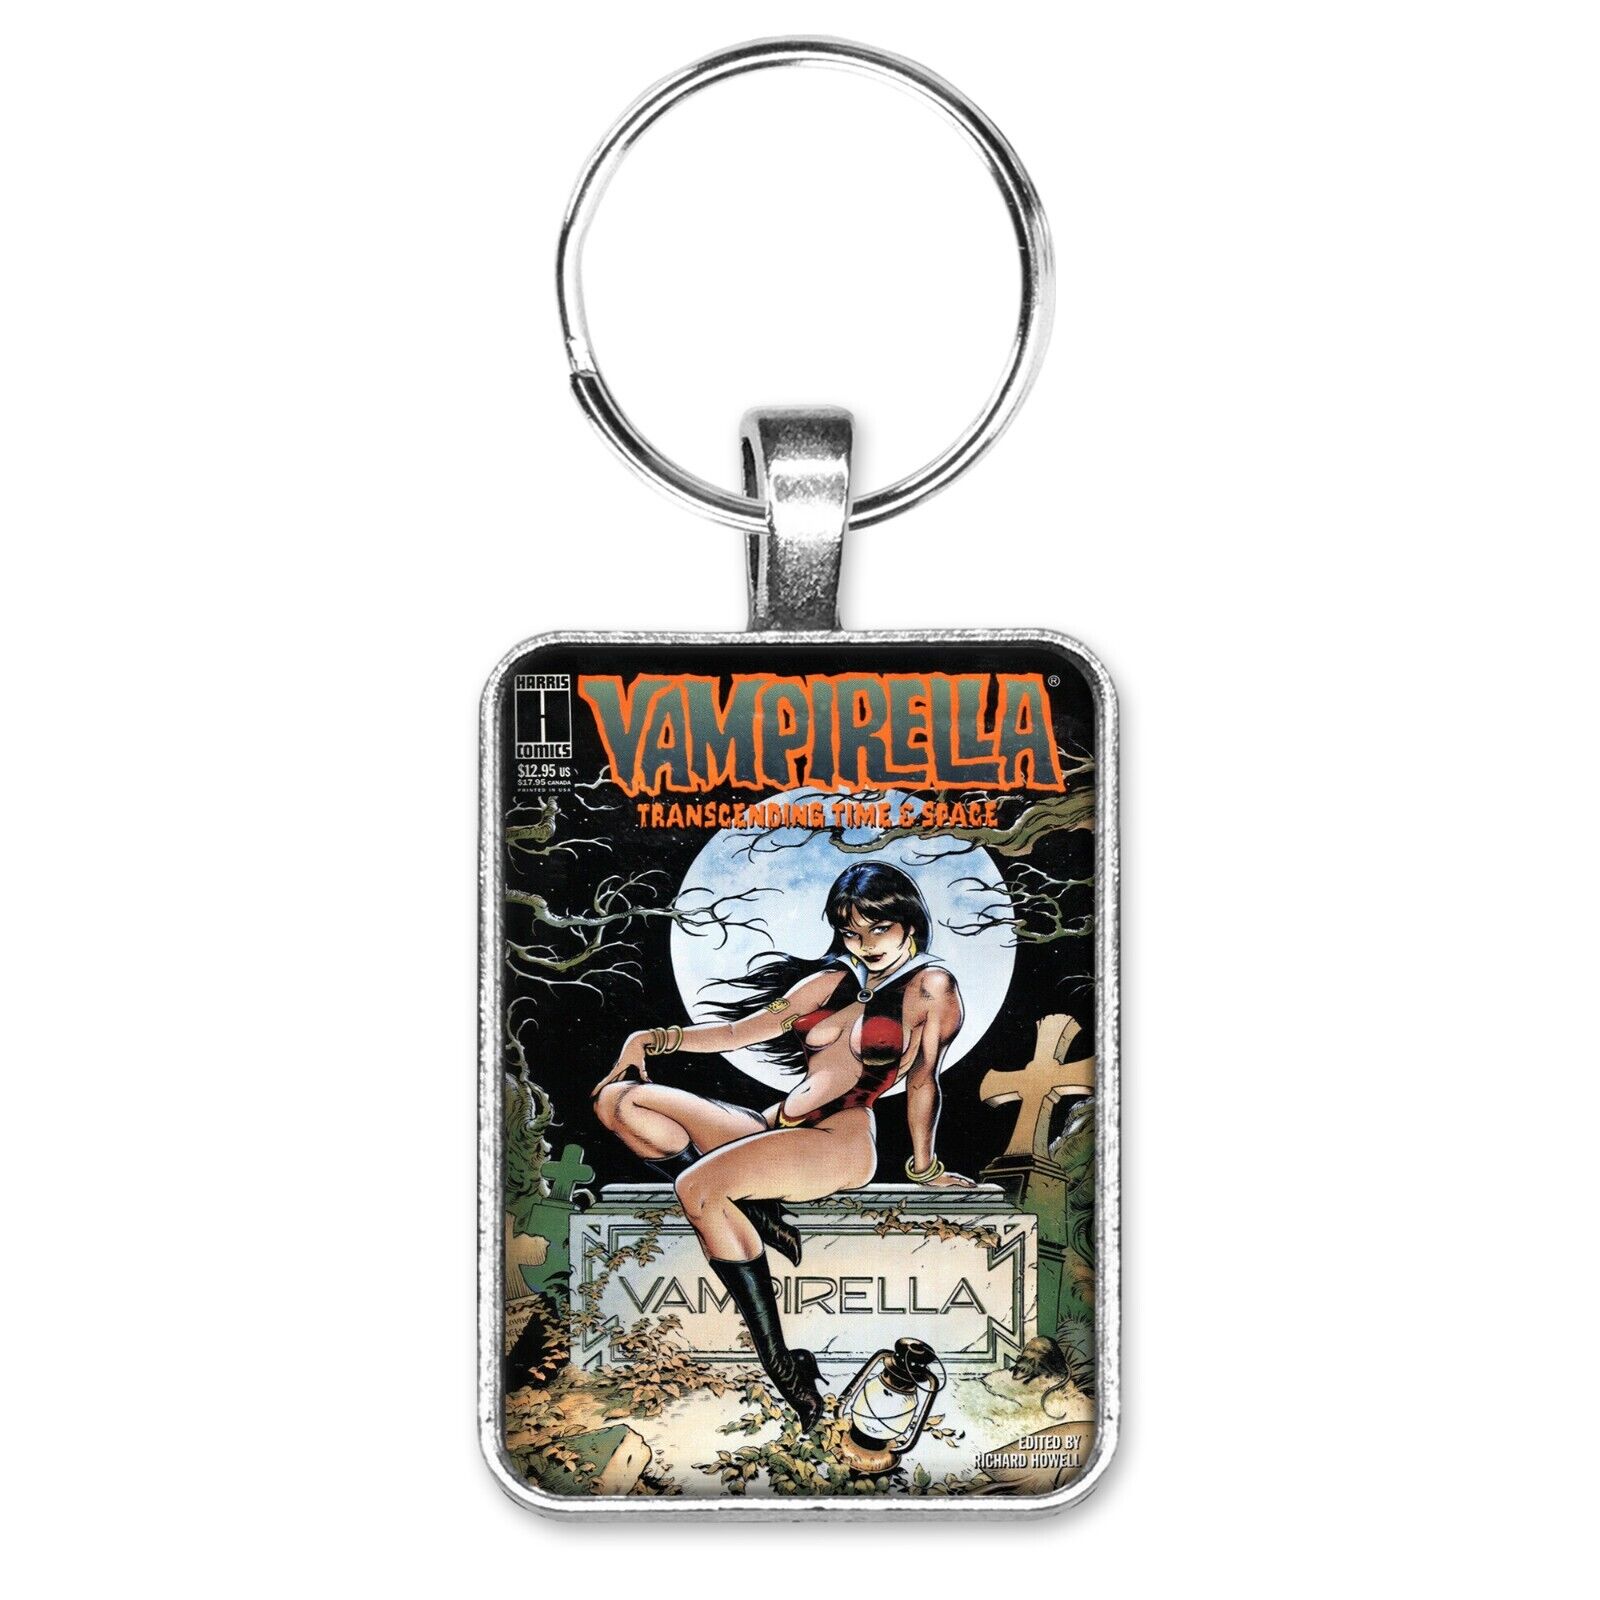 Vampirella Transcending Time and Space Cover Key Ring or Necklace Harris Comics